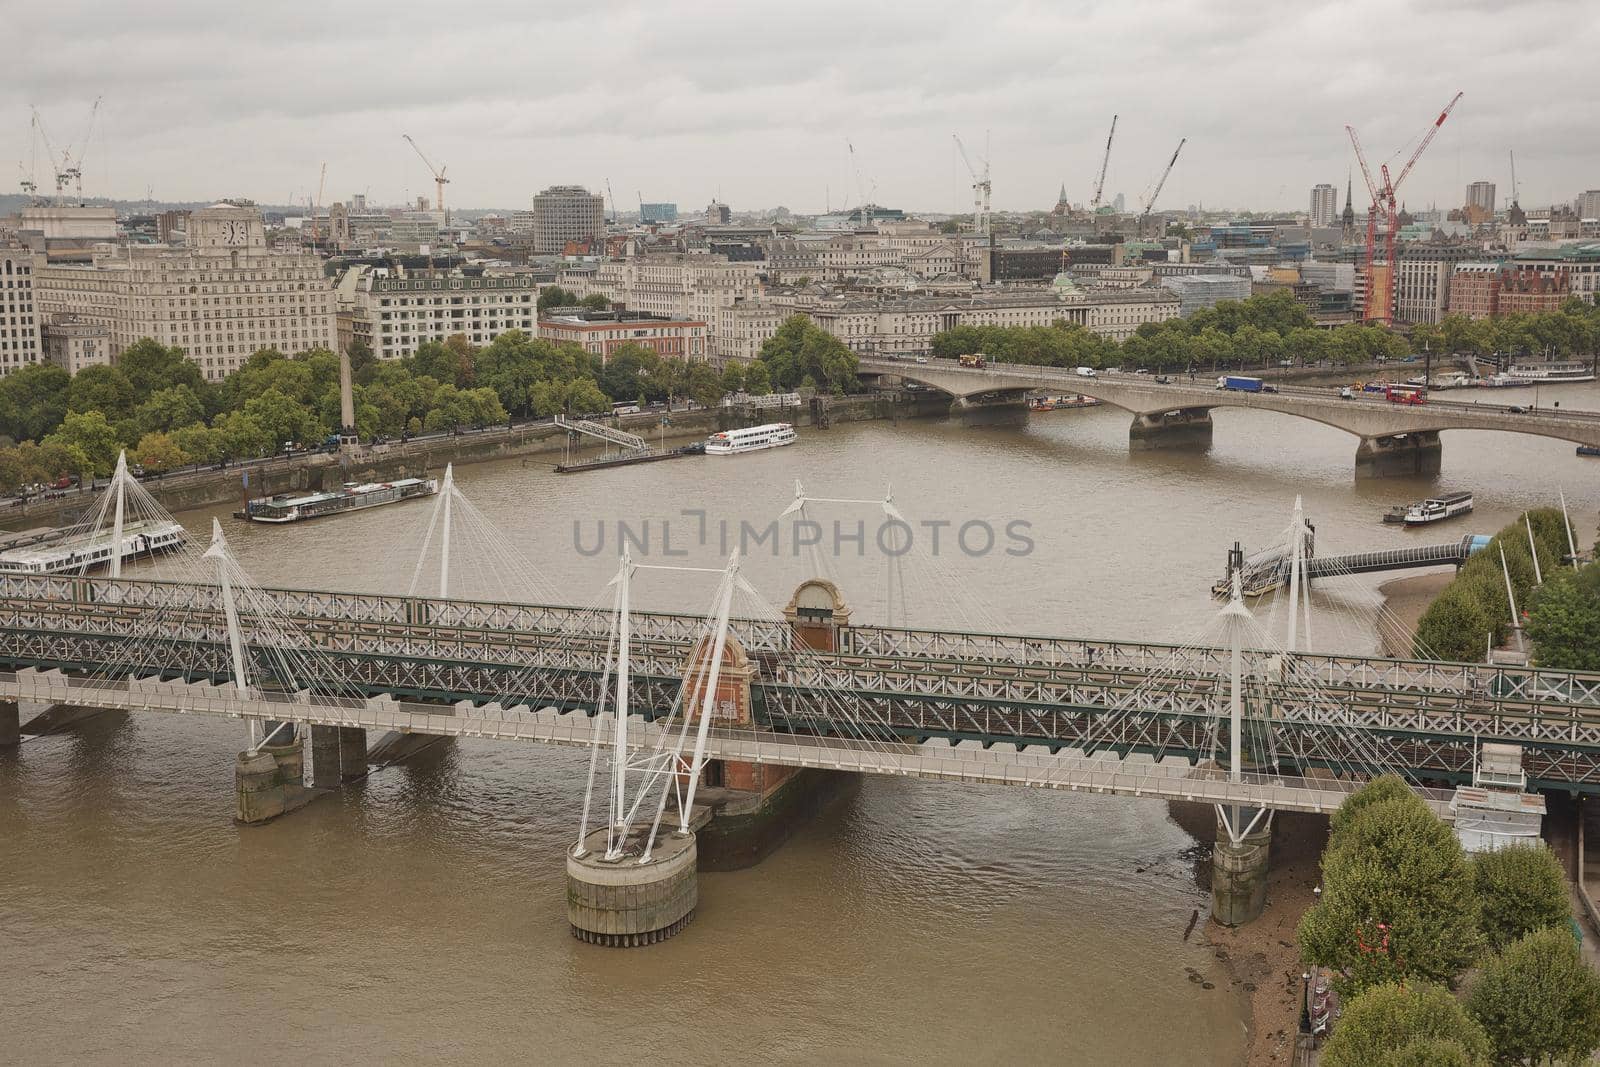 LONDON, UK - SEPTEMBER 08, 2017: The view of the city from the London Eye ferris wheel on the South Bank of River Thames aka Millennium Wheel.